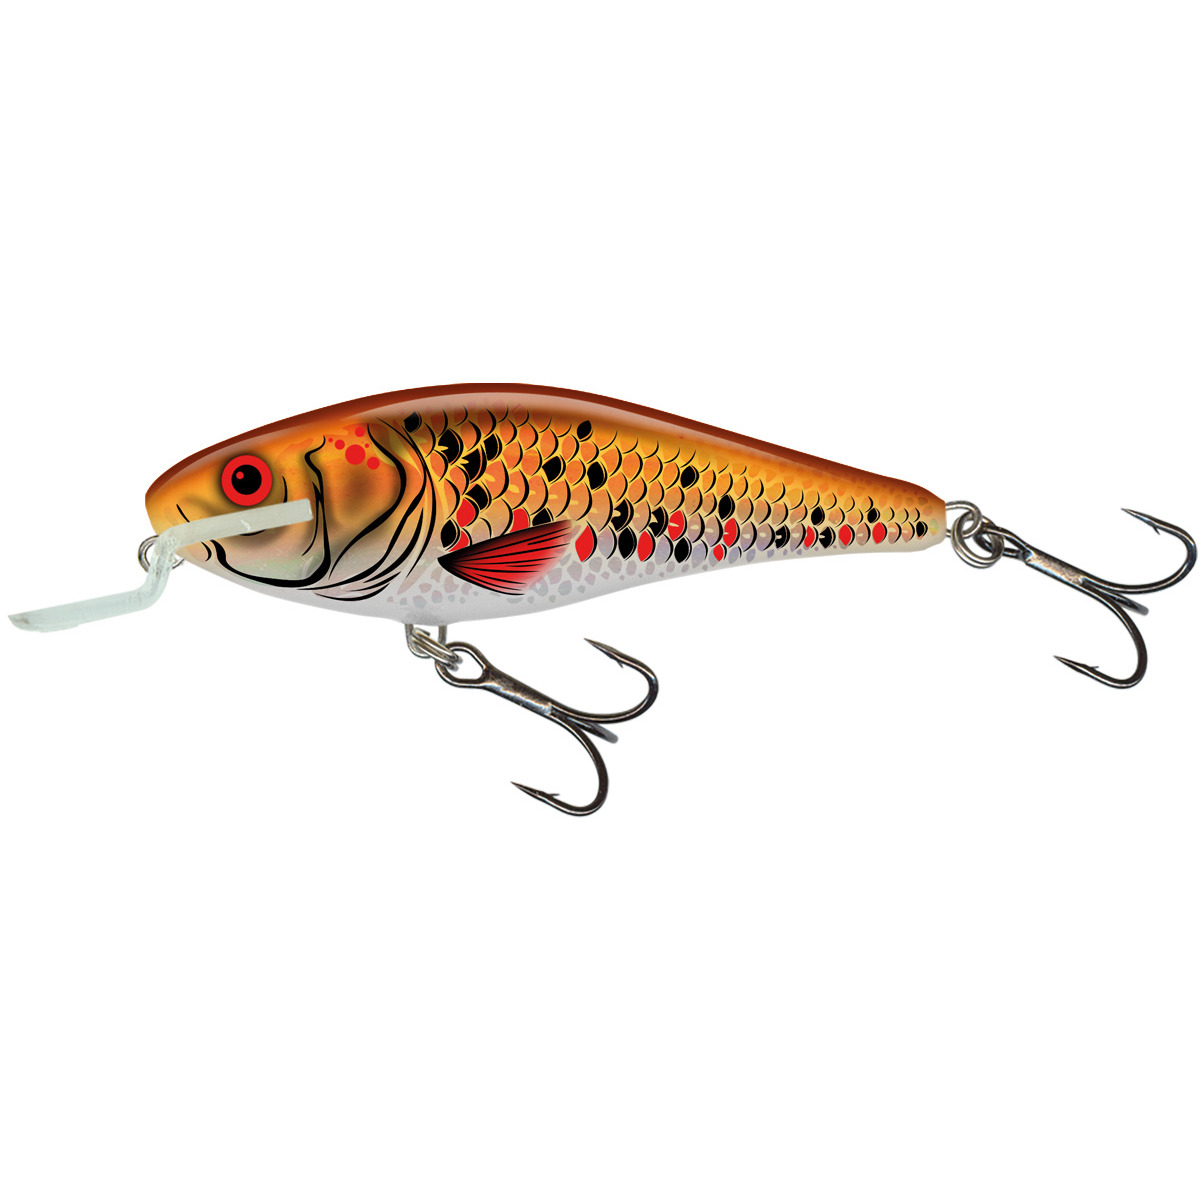 Salmo Executor Shallow Runner Floating 7cm - Holographic Golden Back